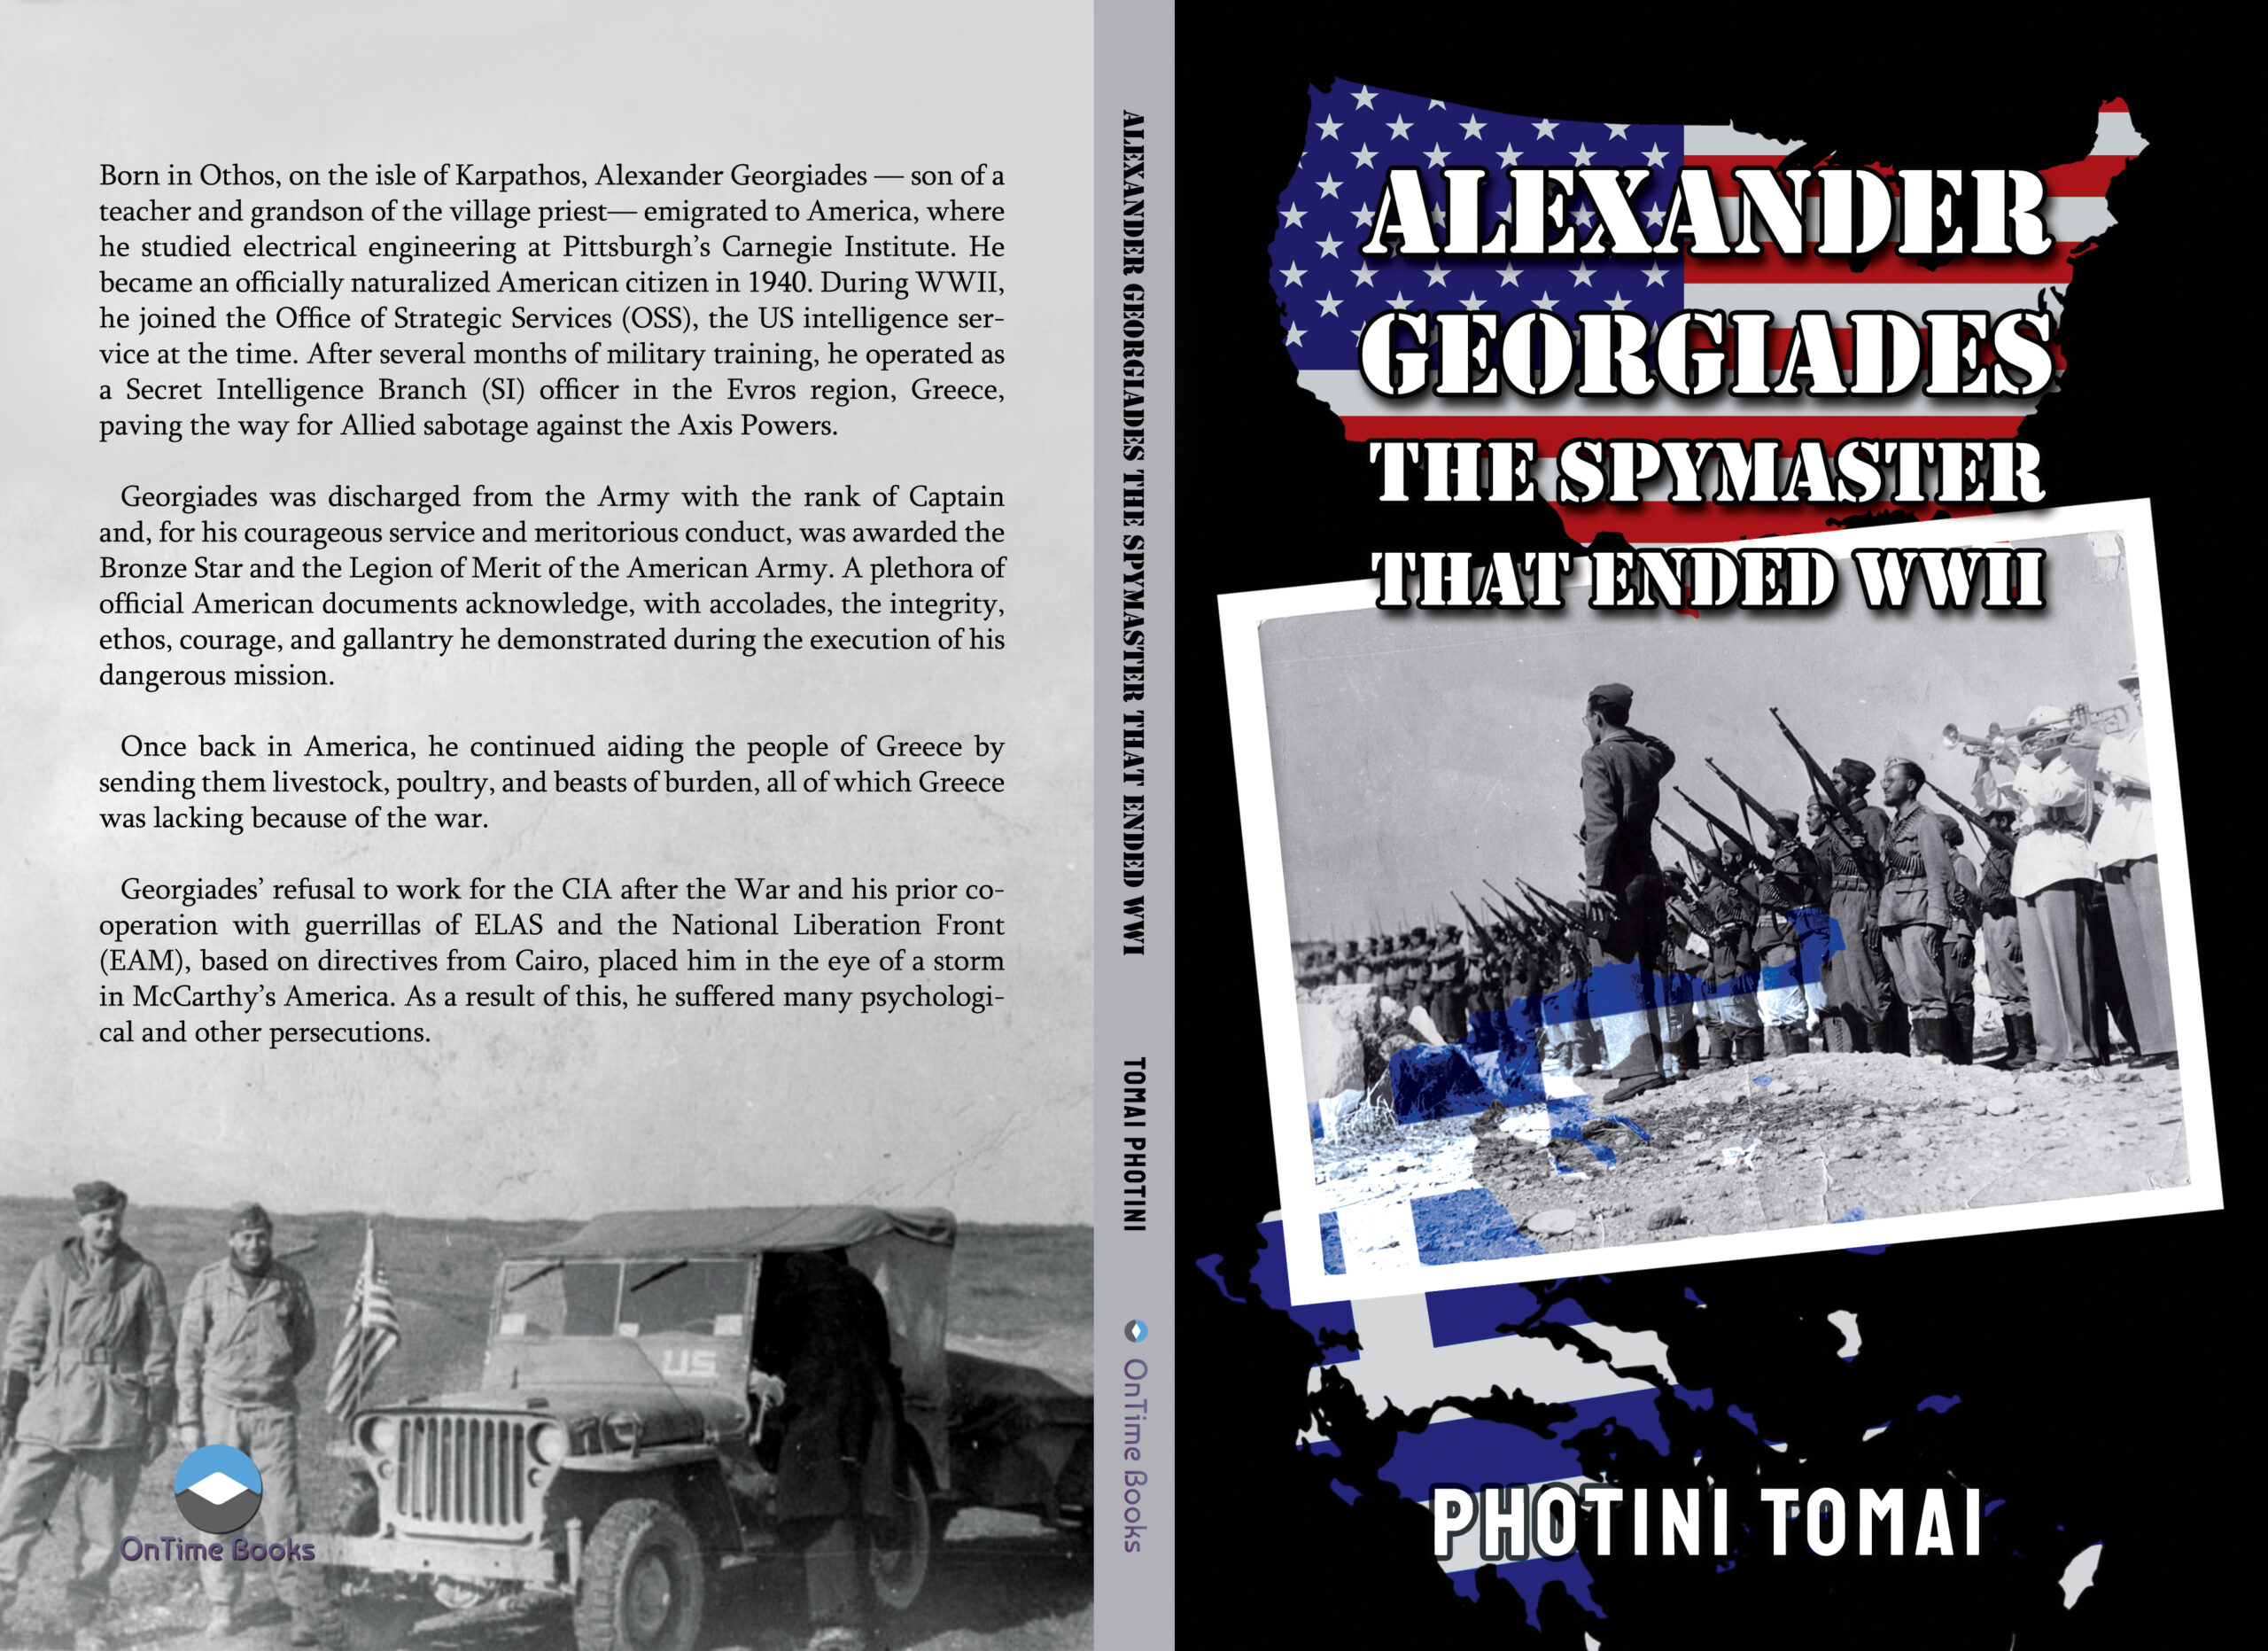 FREE: ALEXANDER GEORGIADES THE SPYMASTER THAT ENDED WWII by Photini Tomai